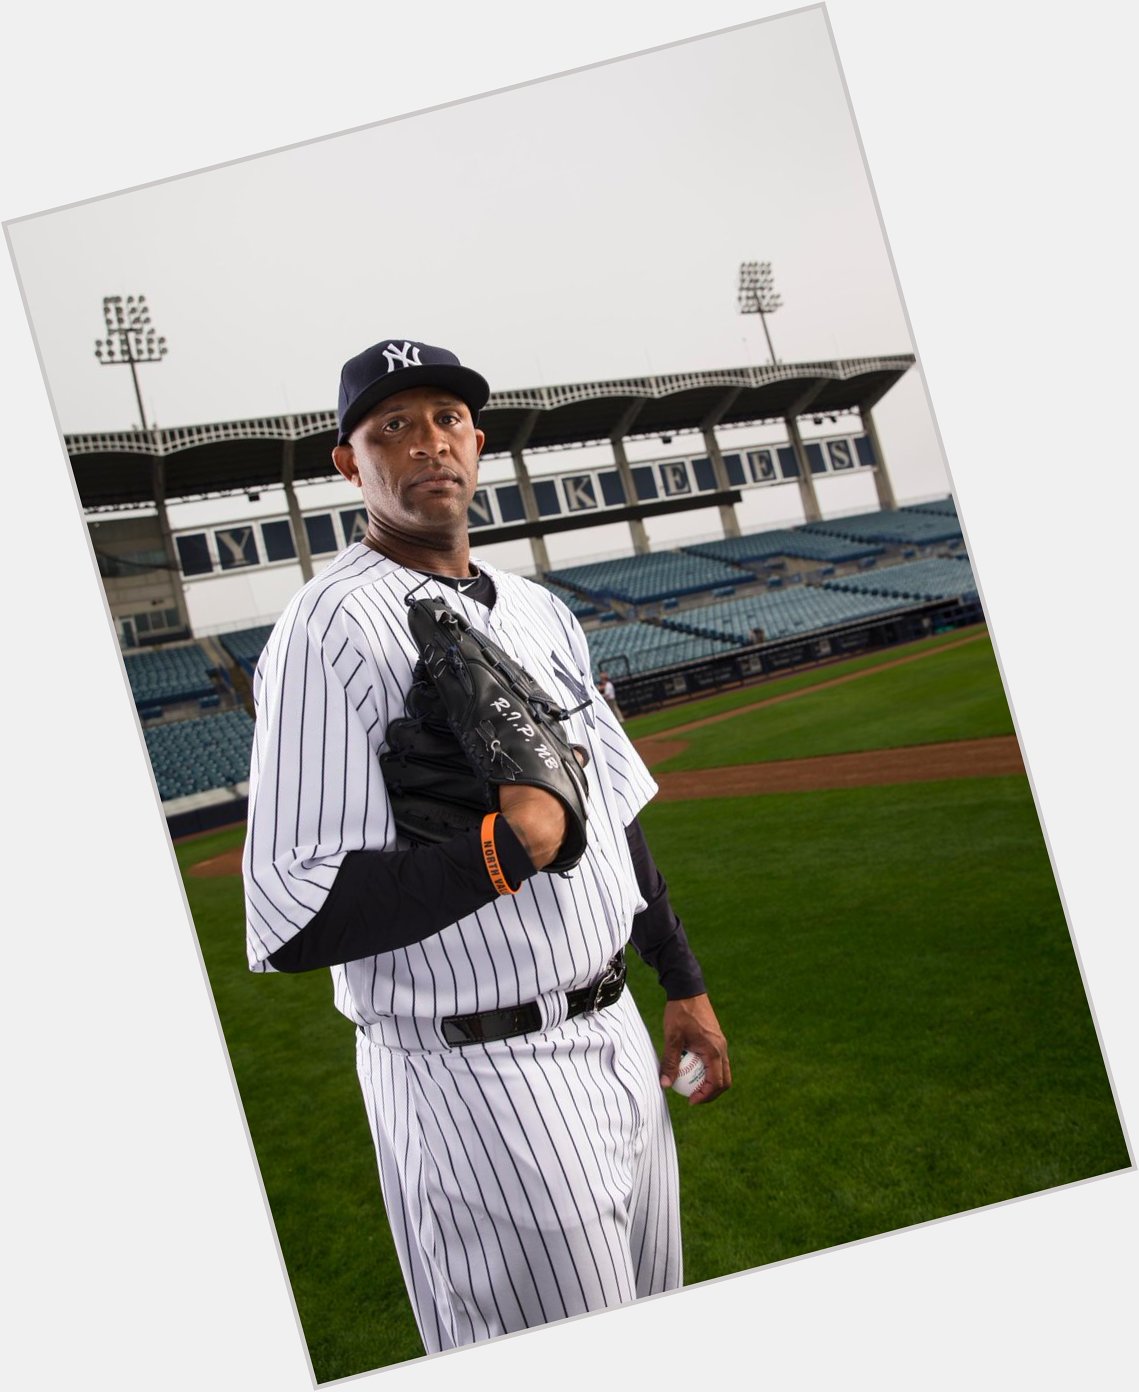 Happy birthday to former Cy Young winner and World Series champion, CC Sabathia! 